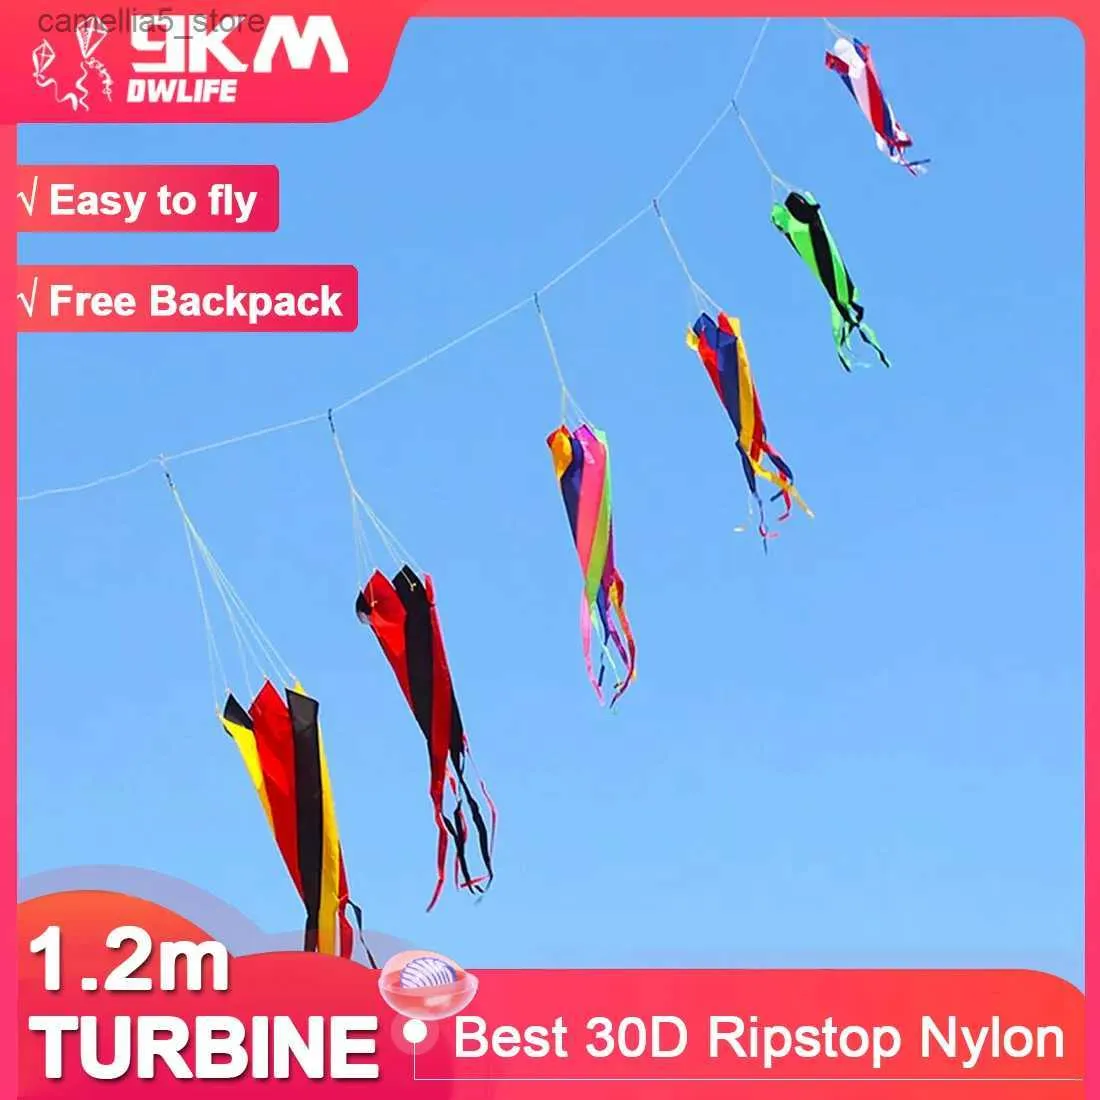 Kite Accessories 9KM 1.2m Spinner Windsock Turbine Line Laundry Pendant Soft Inflatable Show Kite 30D Ripstop Nylon with Bag Q231104